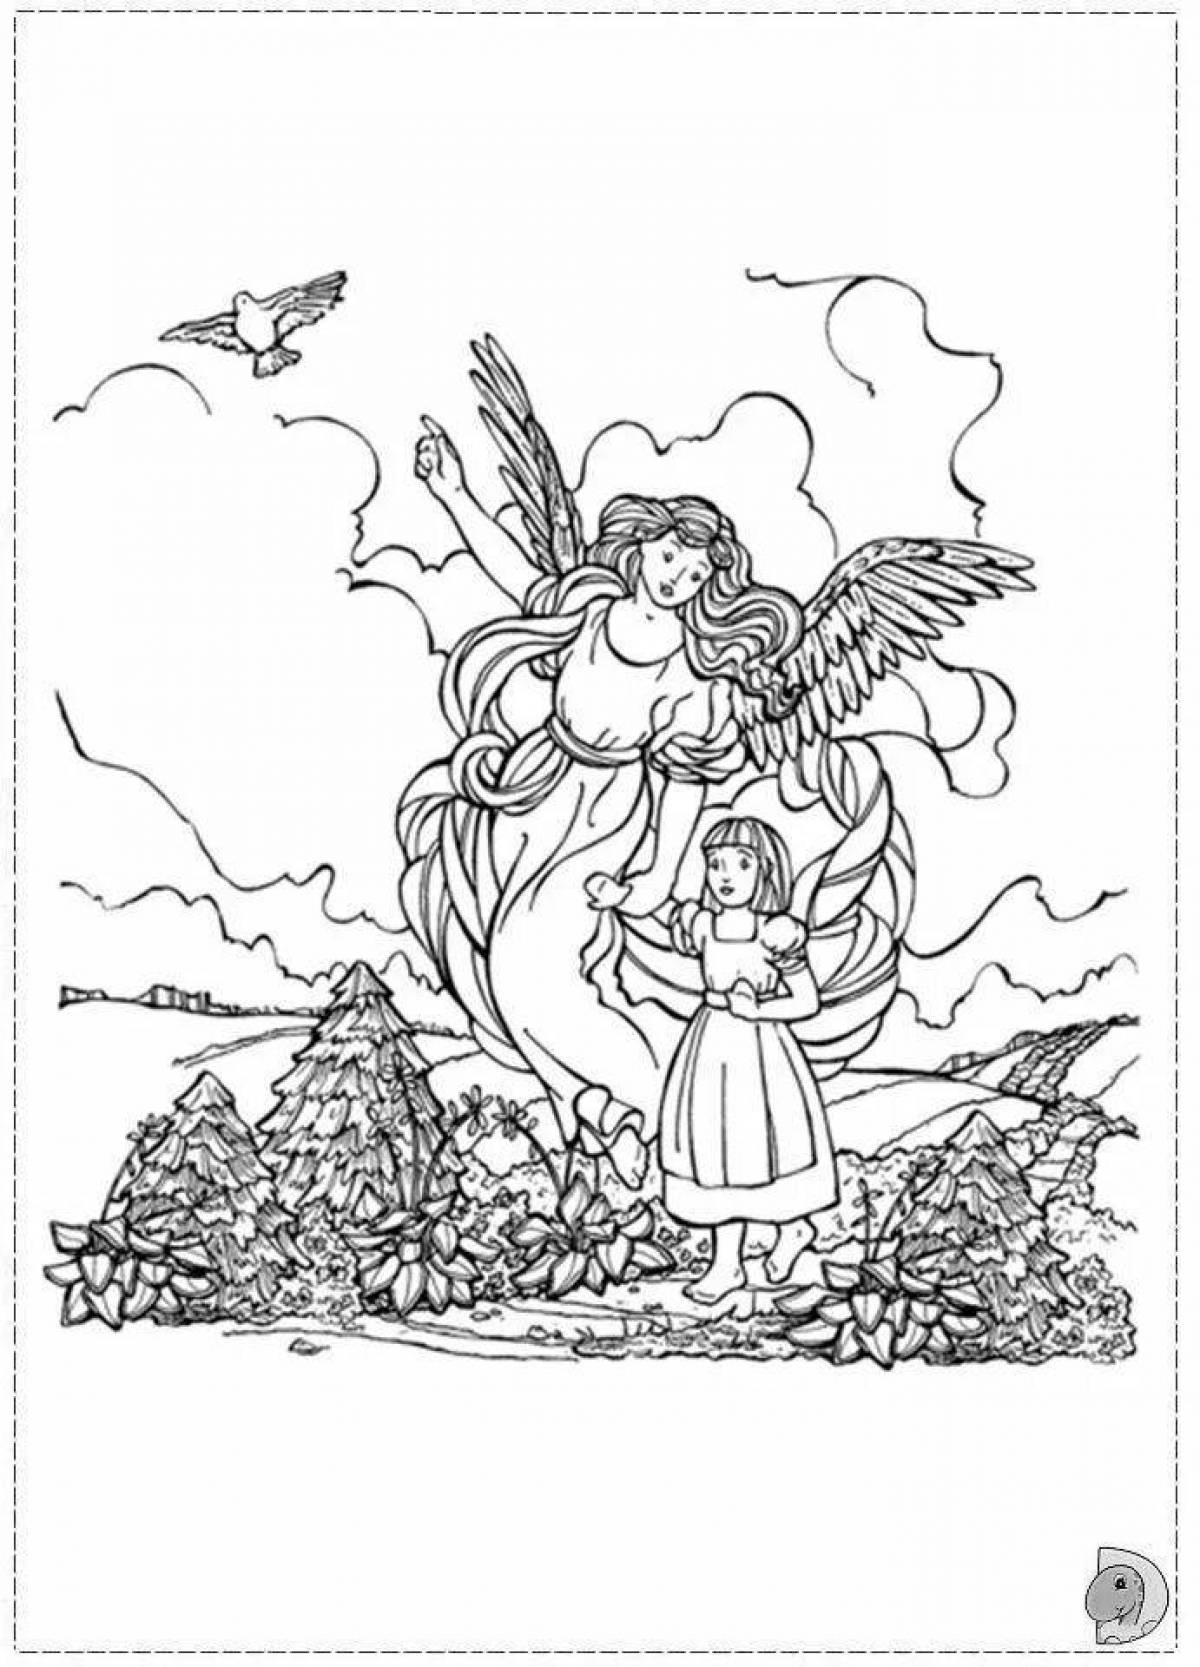 Beautiful guardian angel coloring page